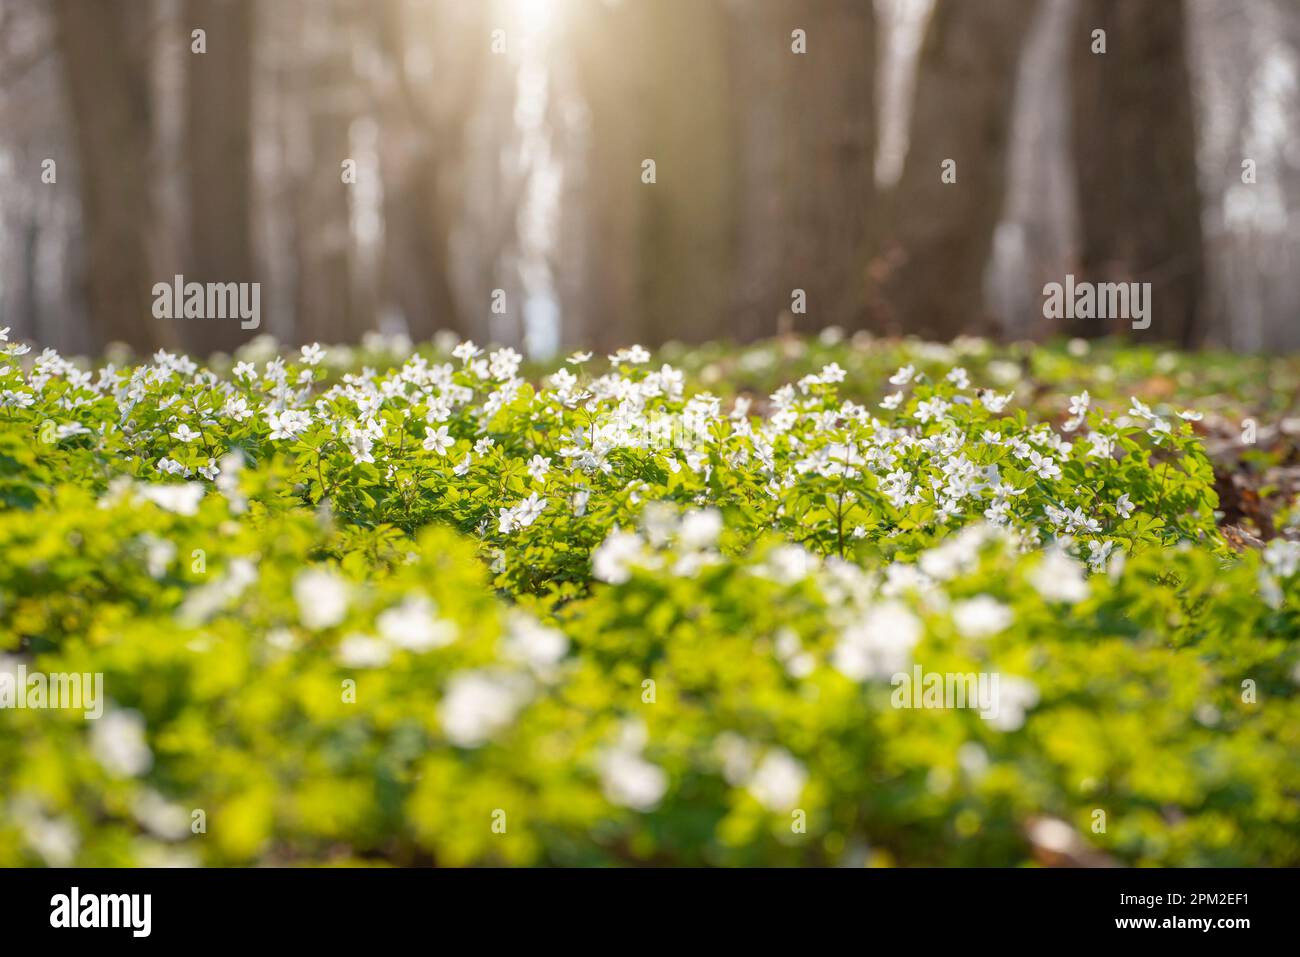 Blooming Snowdrop Anemone flowers under the trees closeup view Stock Photo